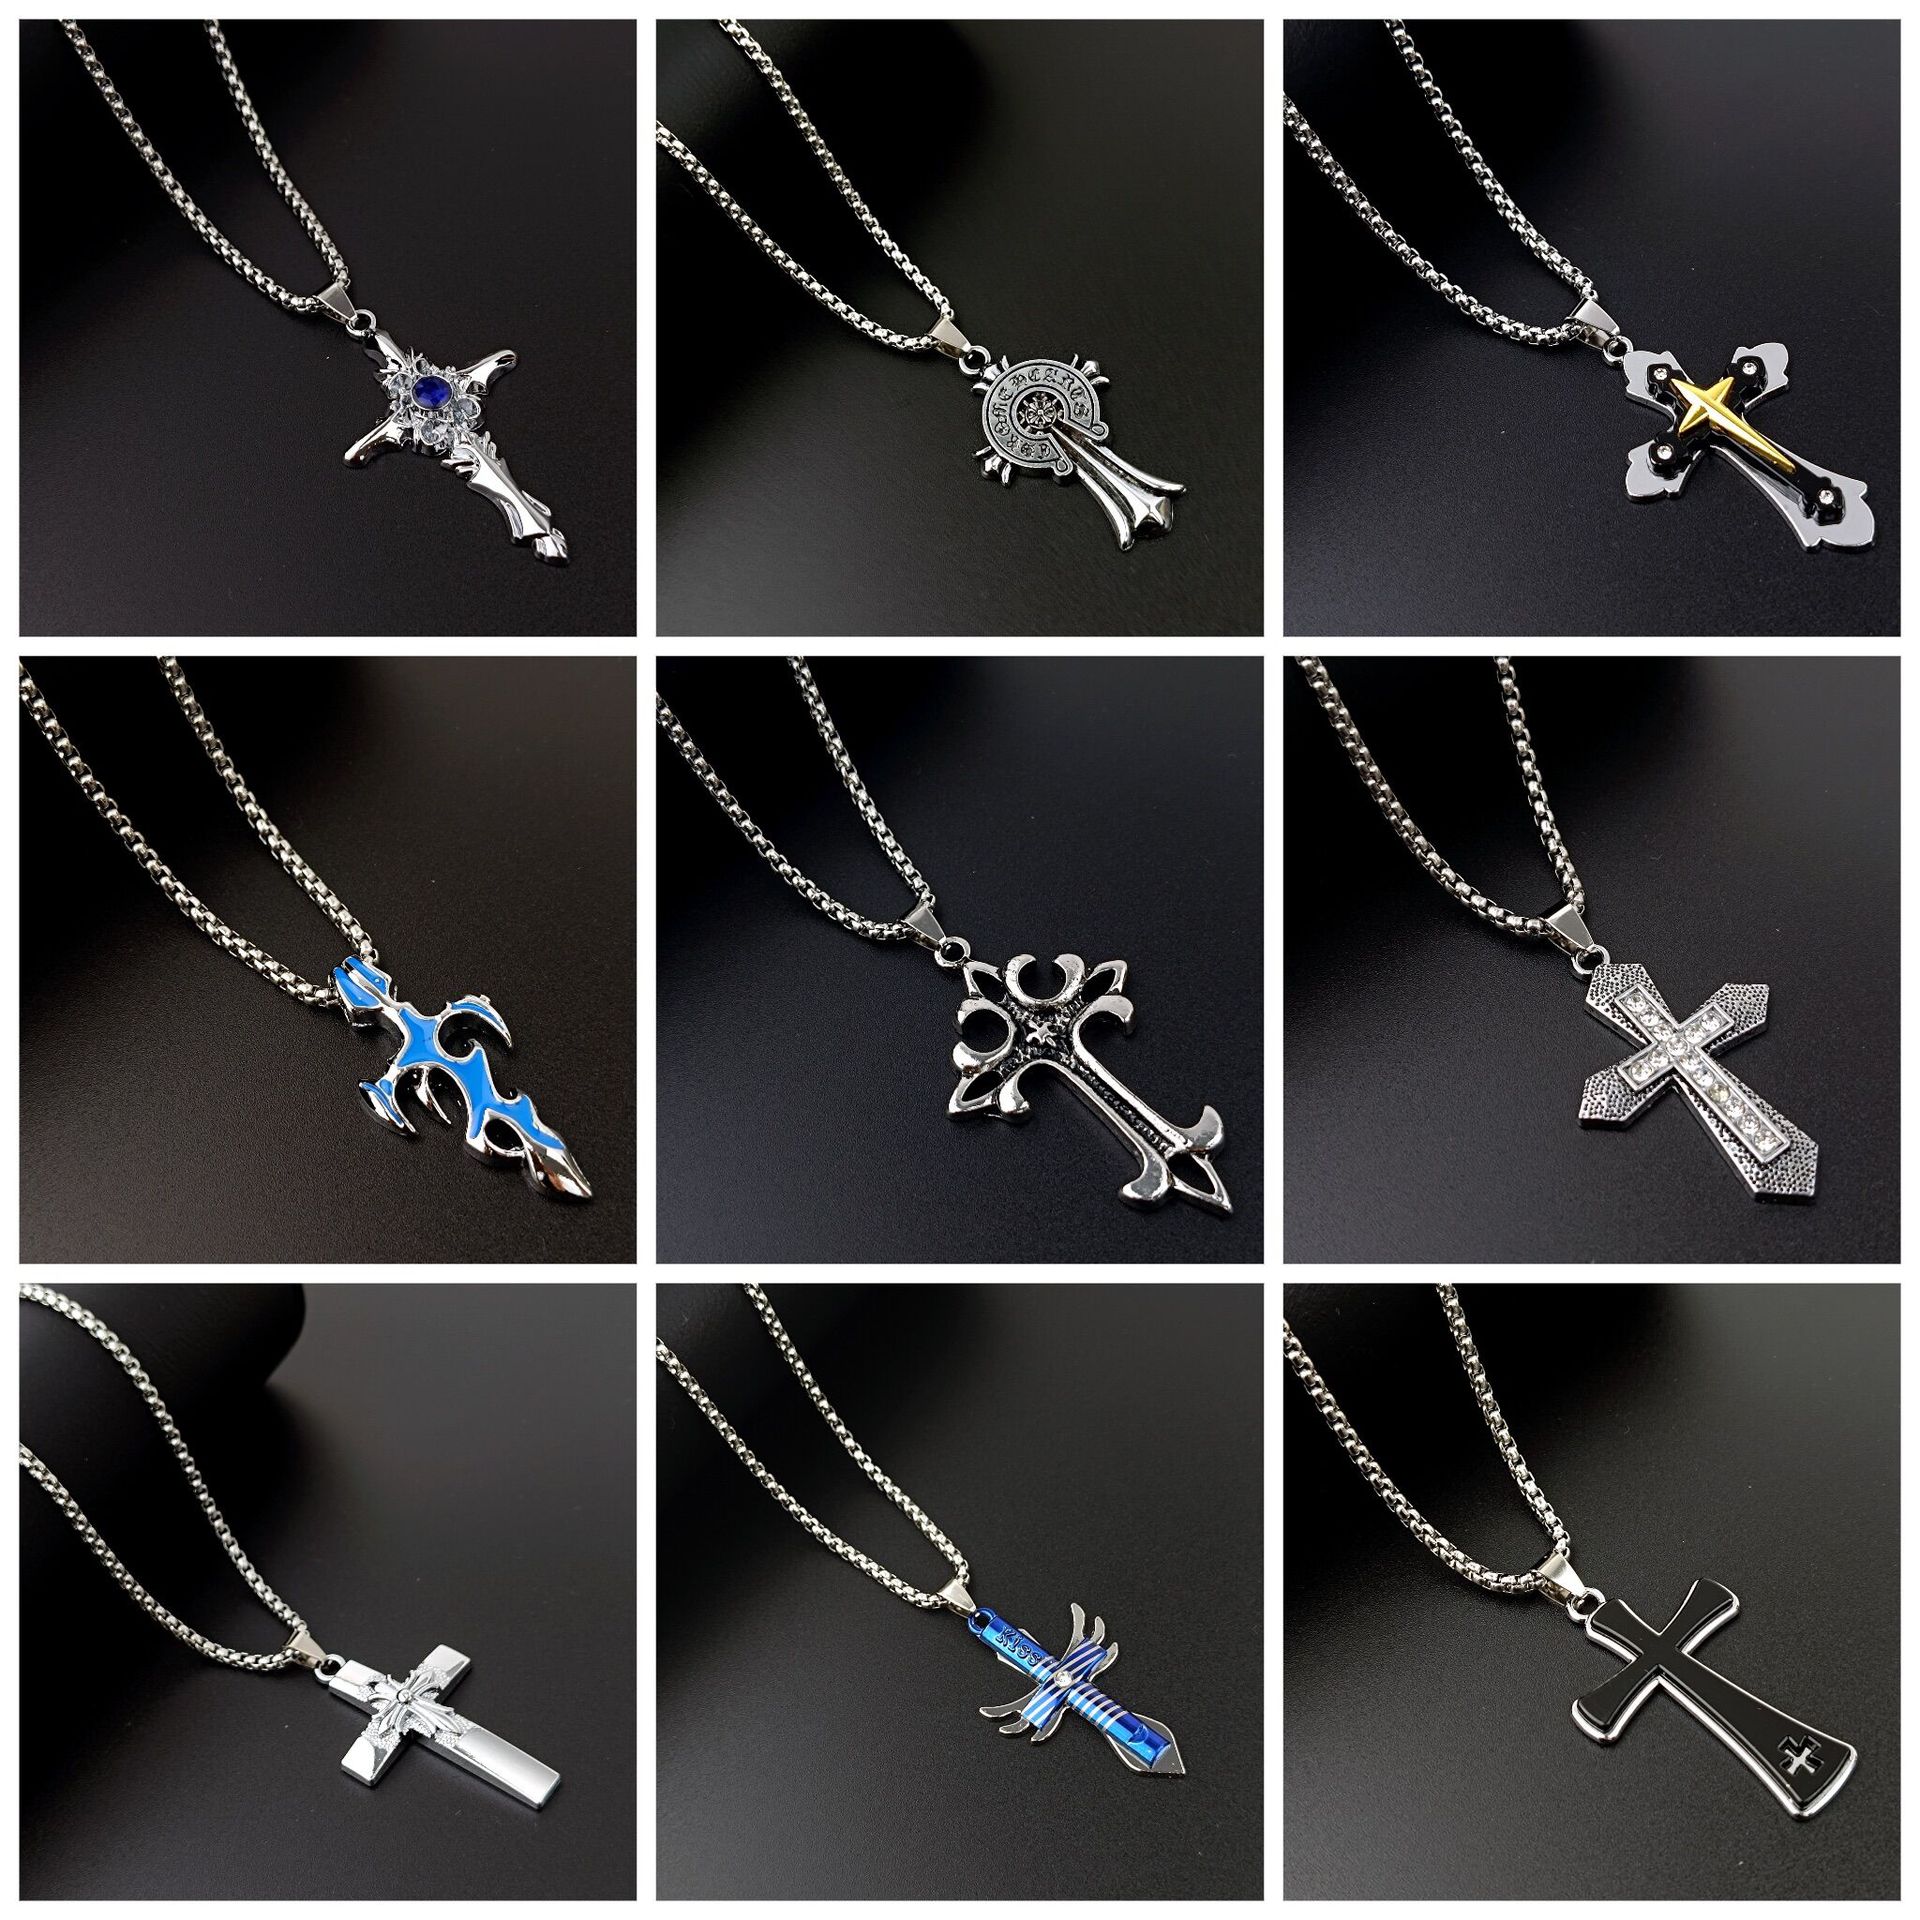 Hot Sale at AliExpress European and American Retro Multi-Layer Cross Necklace Men's Stainless Steel Cross Pendant Clavicle Chain